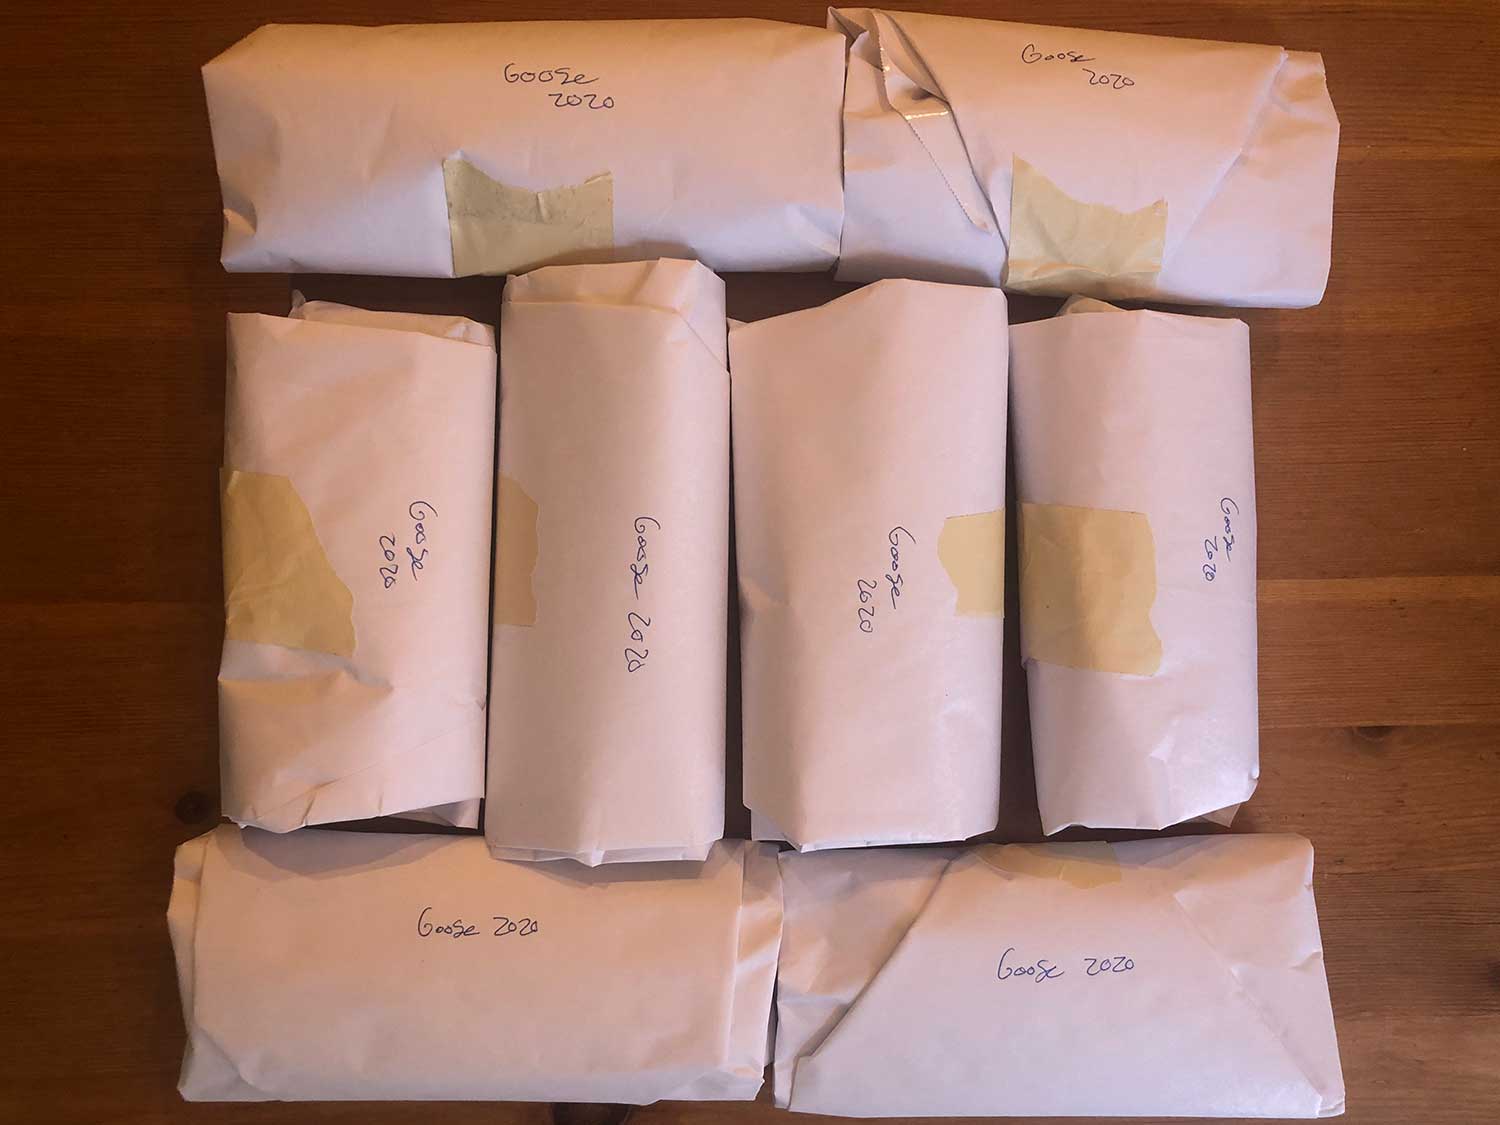 8 packages of goose meat wrapped in butcher paper on a table.